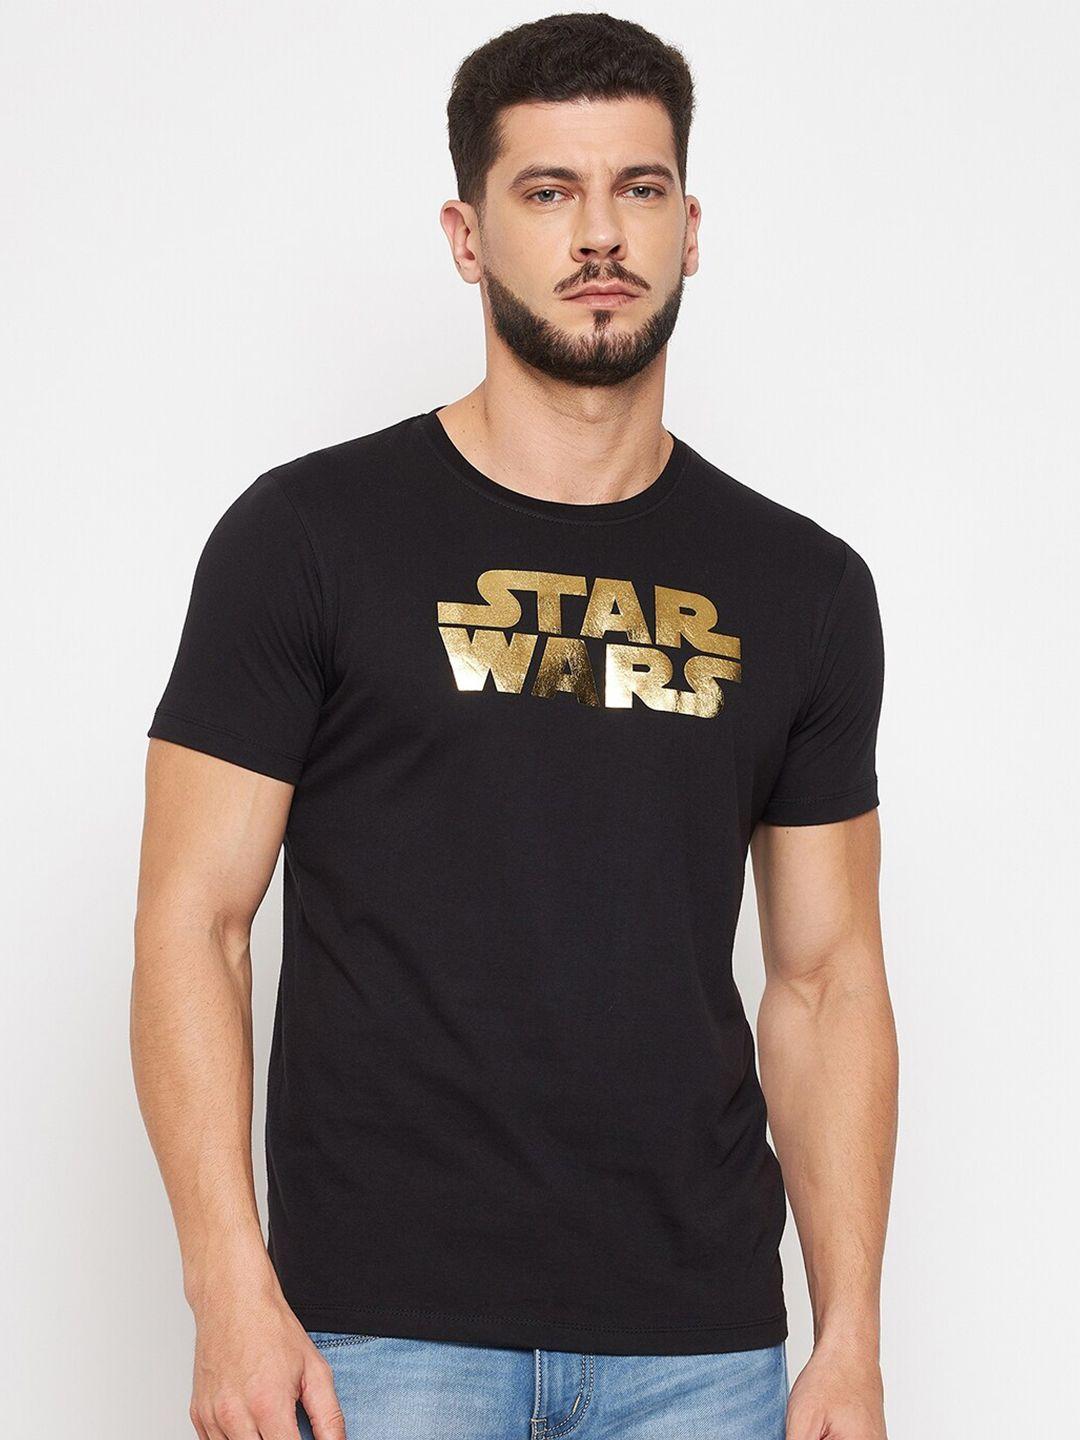 star-wars-by-wear-your-mind-men-star-wars-typography-printed-cotton-t-shirt